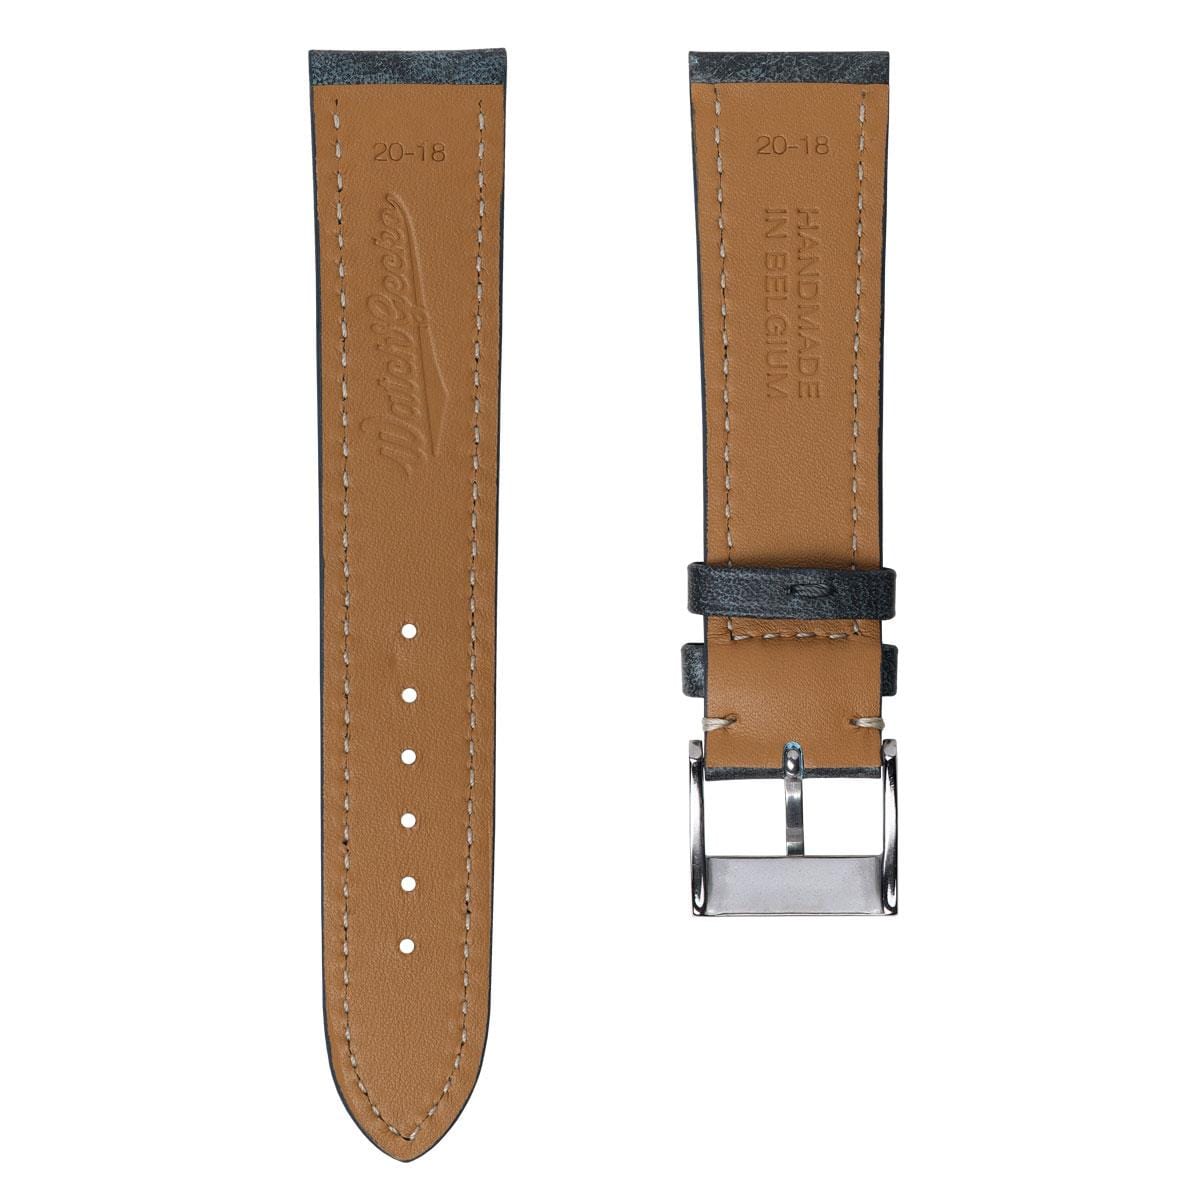 Rochefort Flat Patina Calf Leather Watch Strap - Blue Jeans